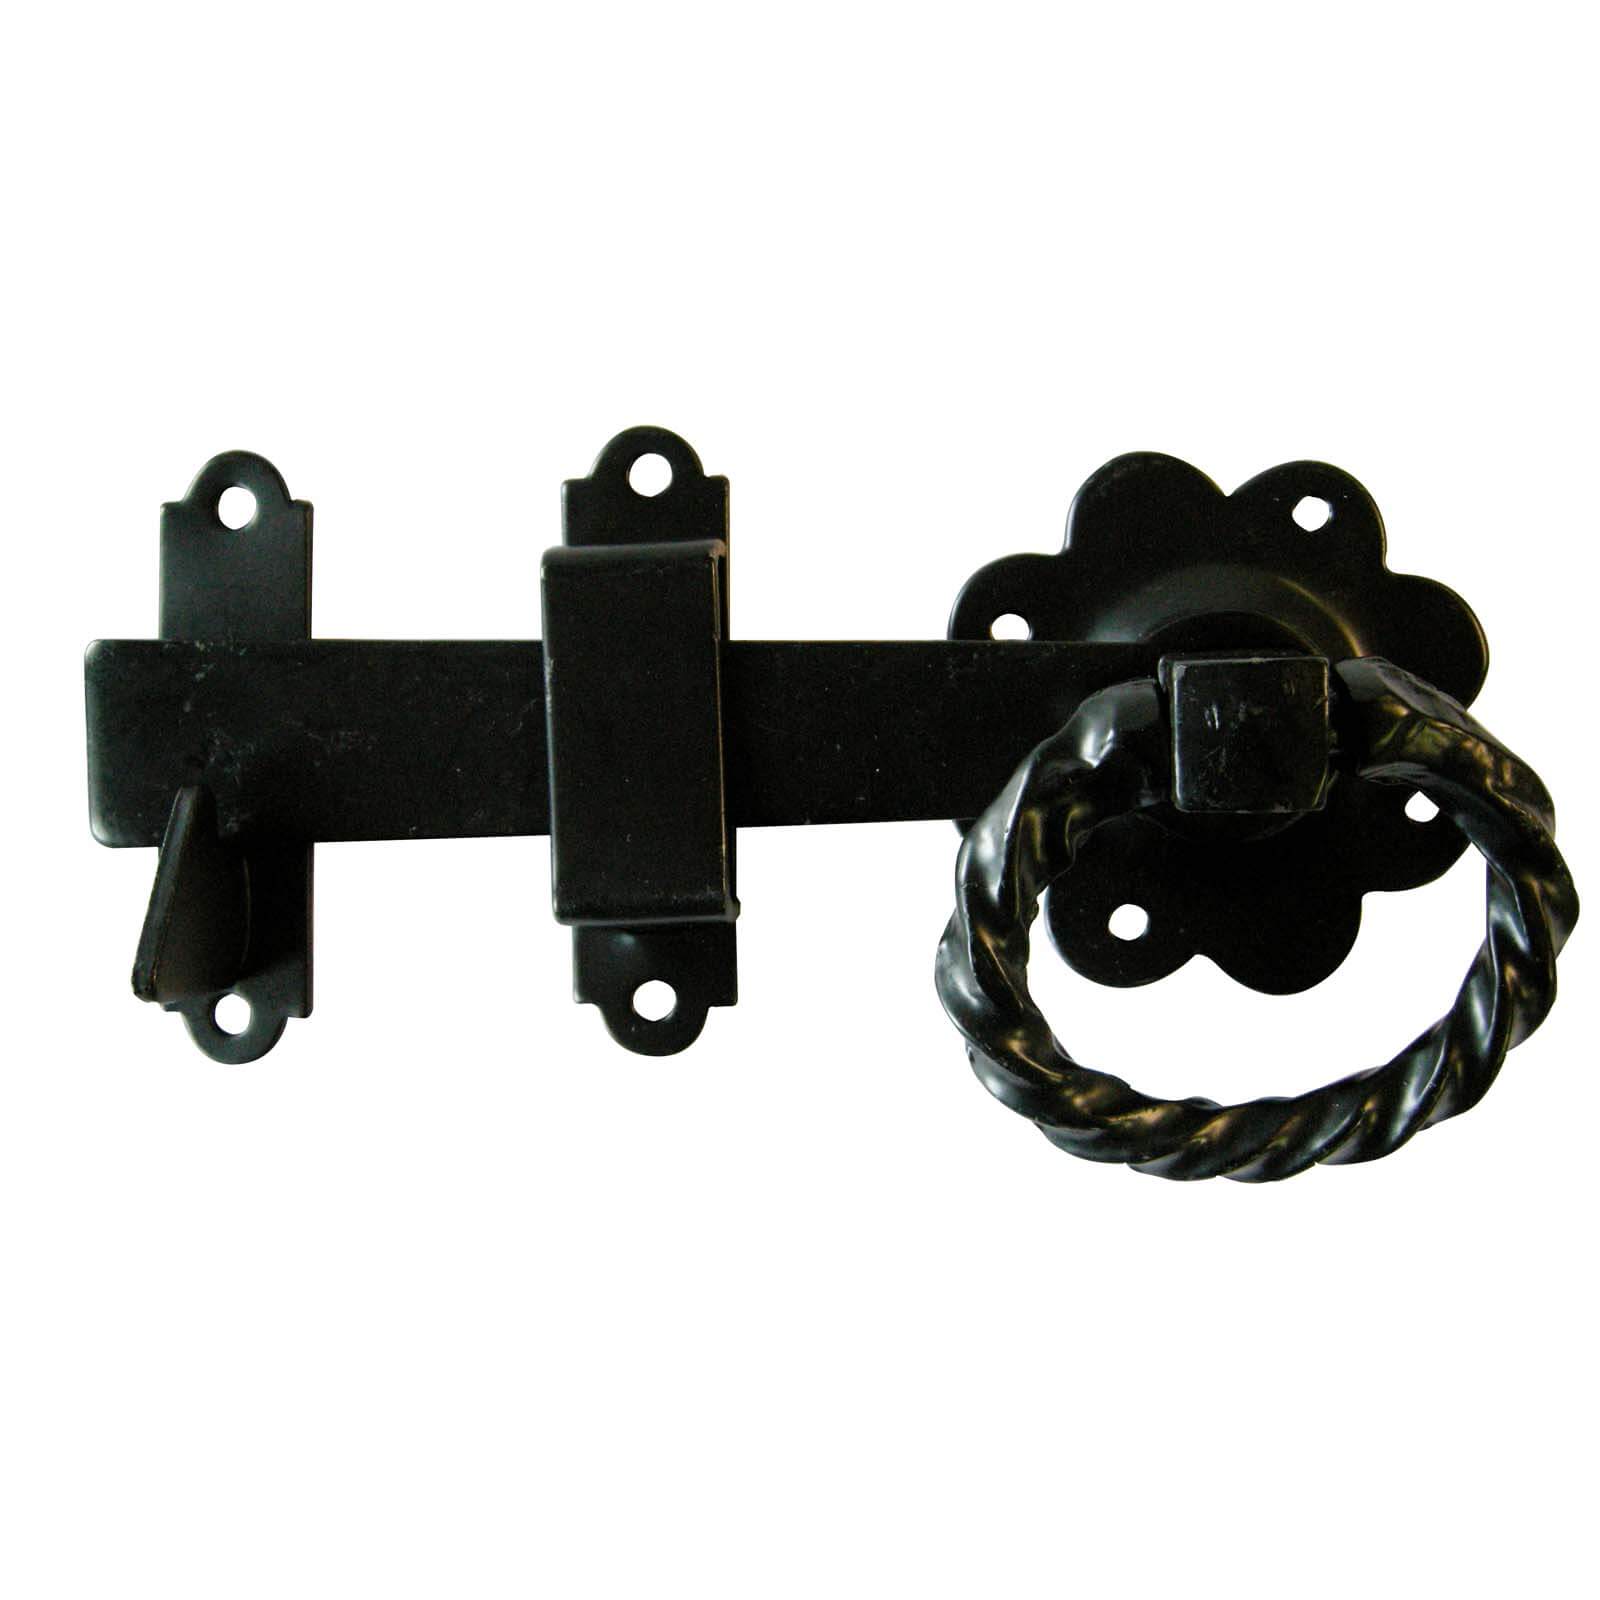 Twisted Ring Handled Gate Latch - Black - 152mm